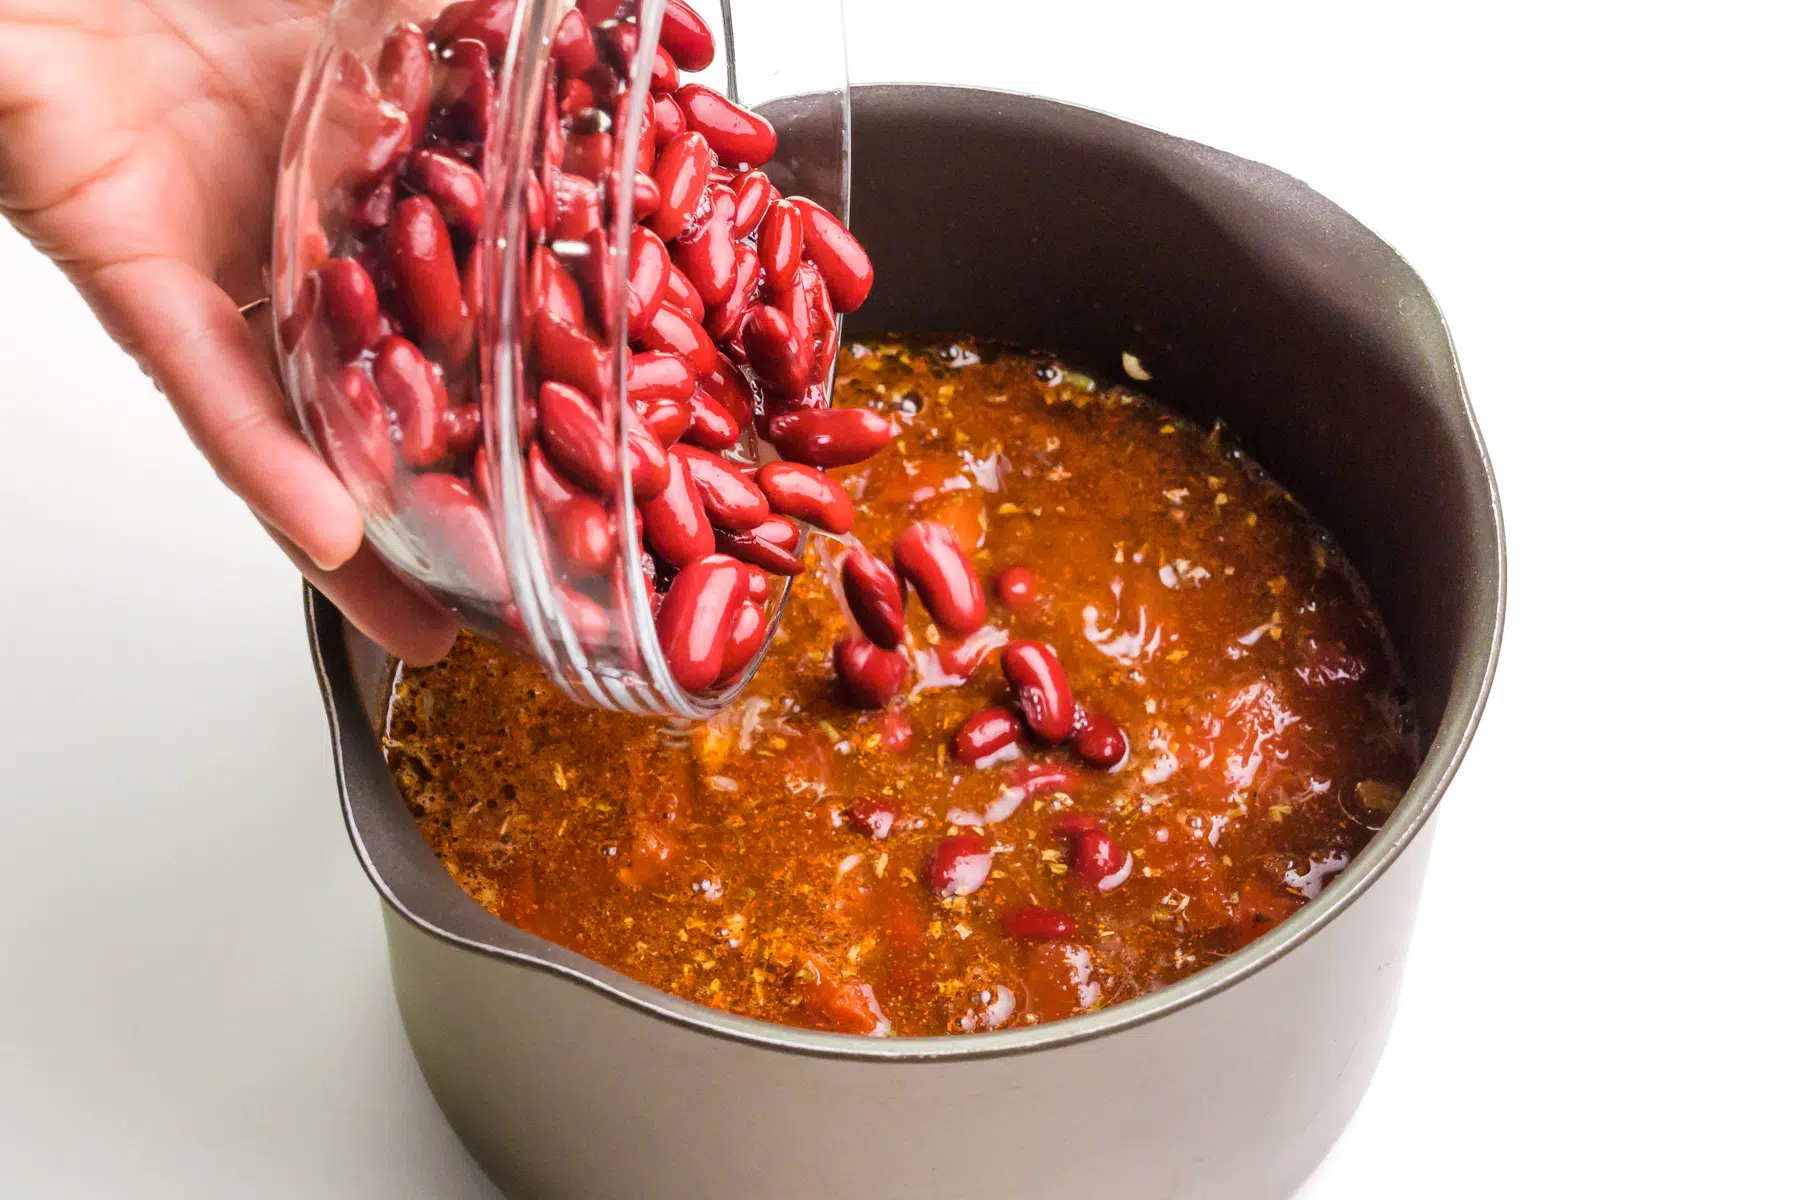 Kidney beans are being poured into a saucepan with tomato-based sauce.